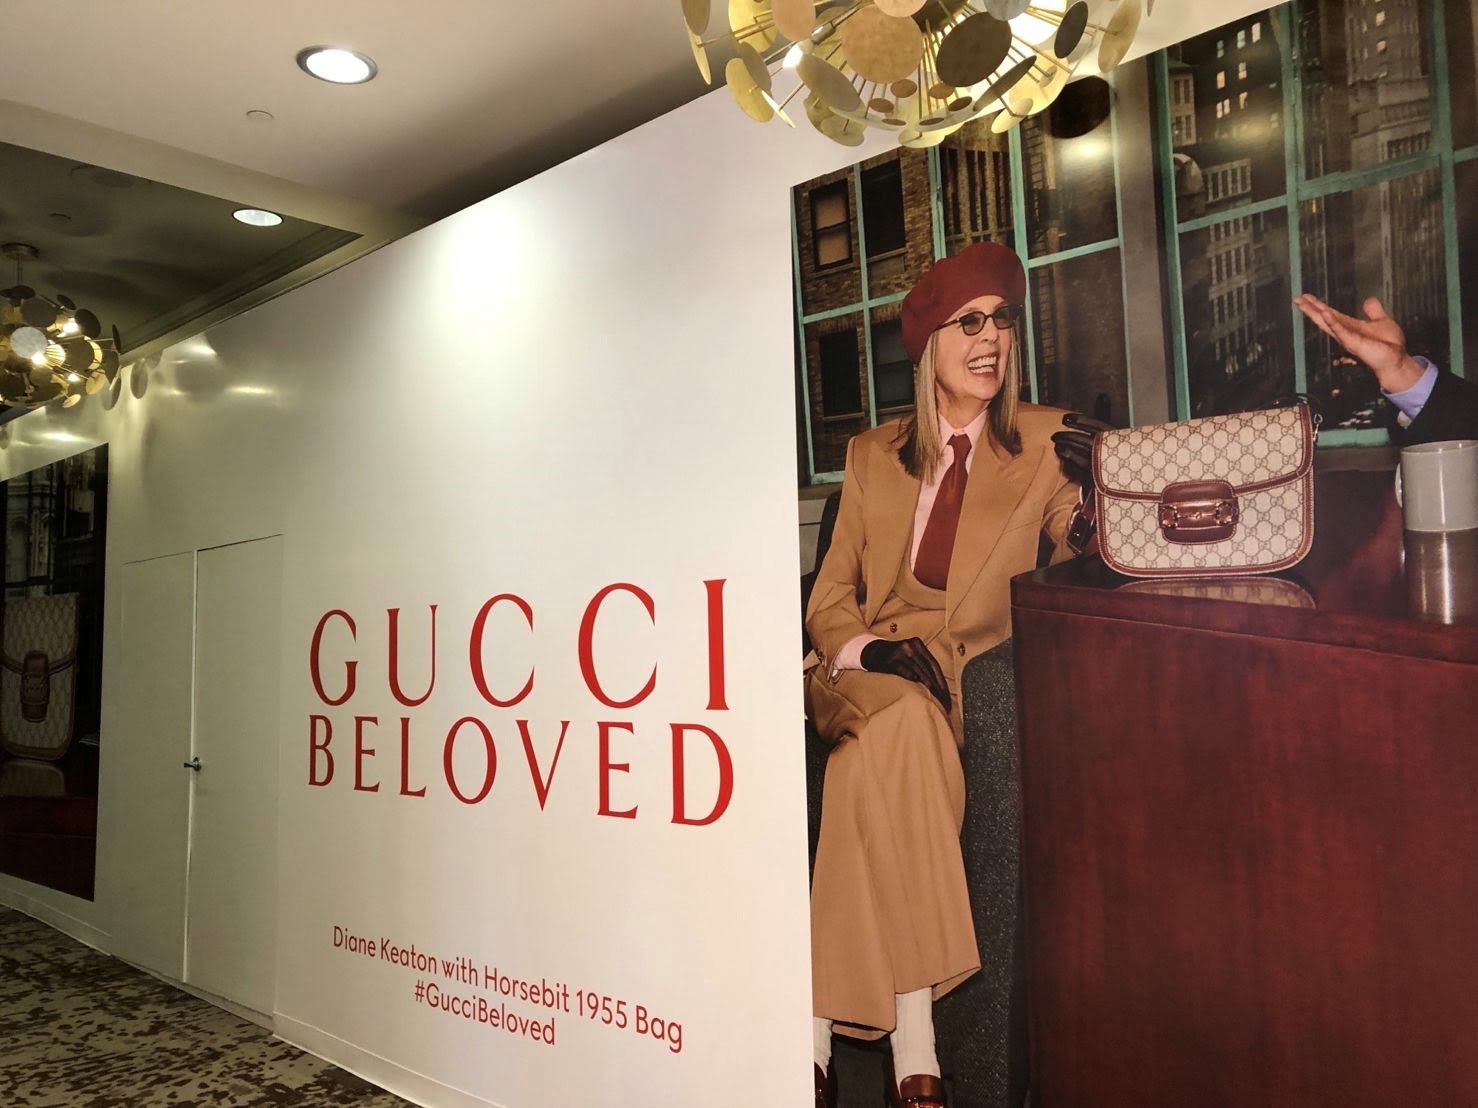 Gucci Construction Signage at Fairmont Hotel Vancouver (Oct 2021)